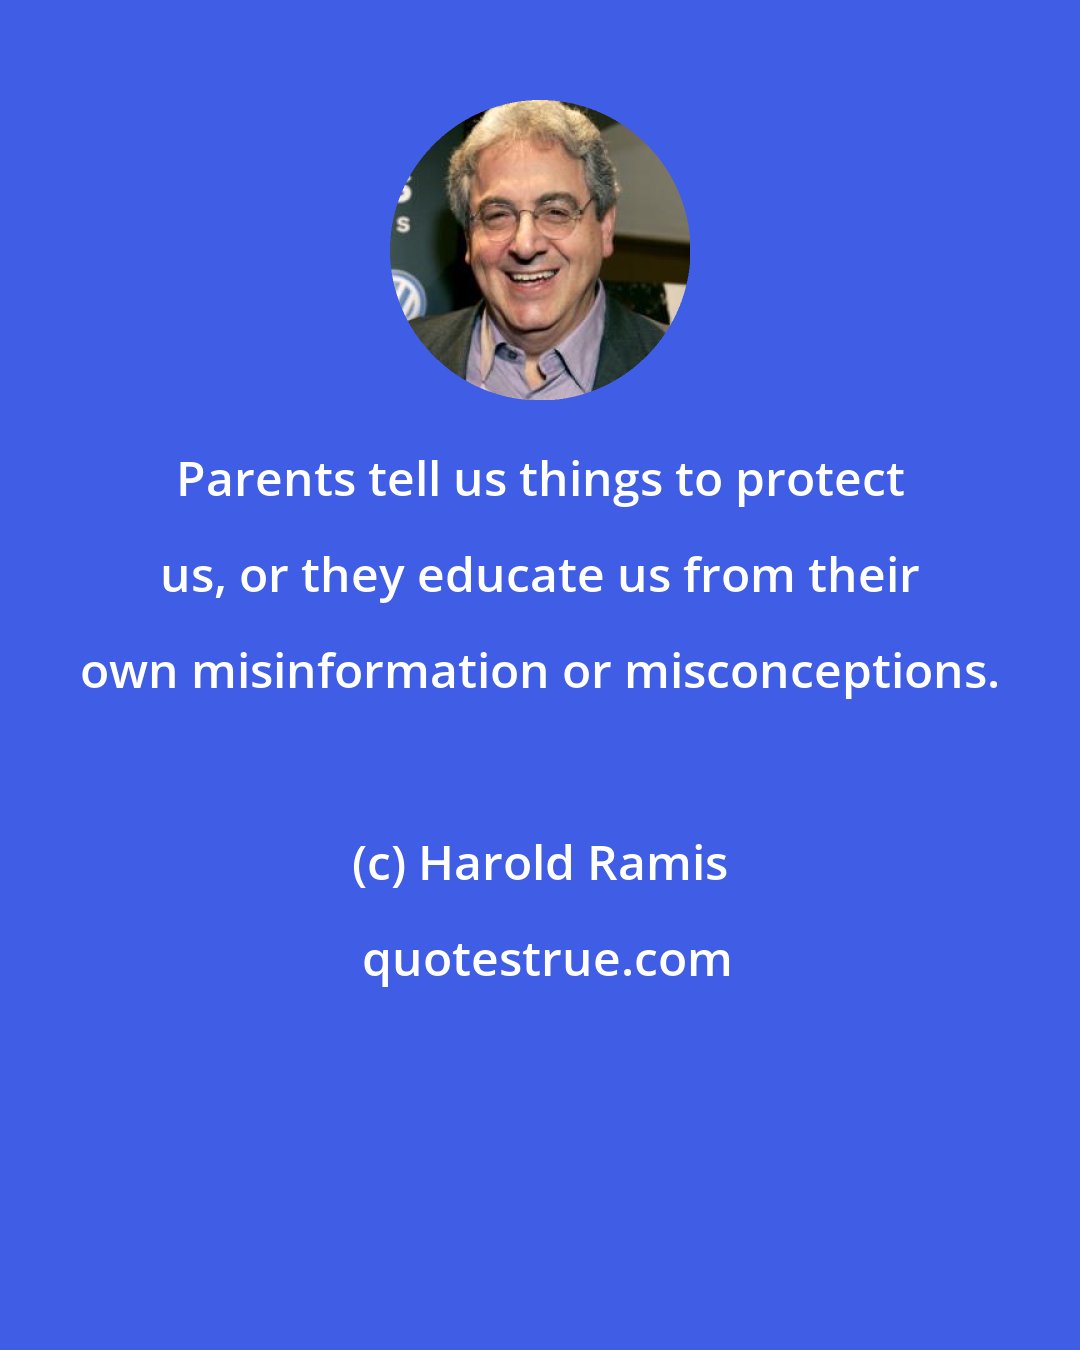 Harold Ramis: Parents tell us things to protect us, or they educate us from their own misinformation or misconceptions.